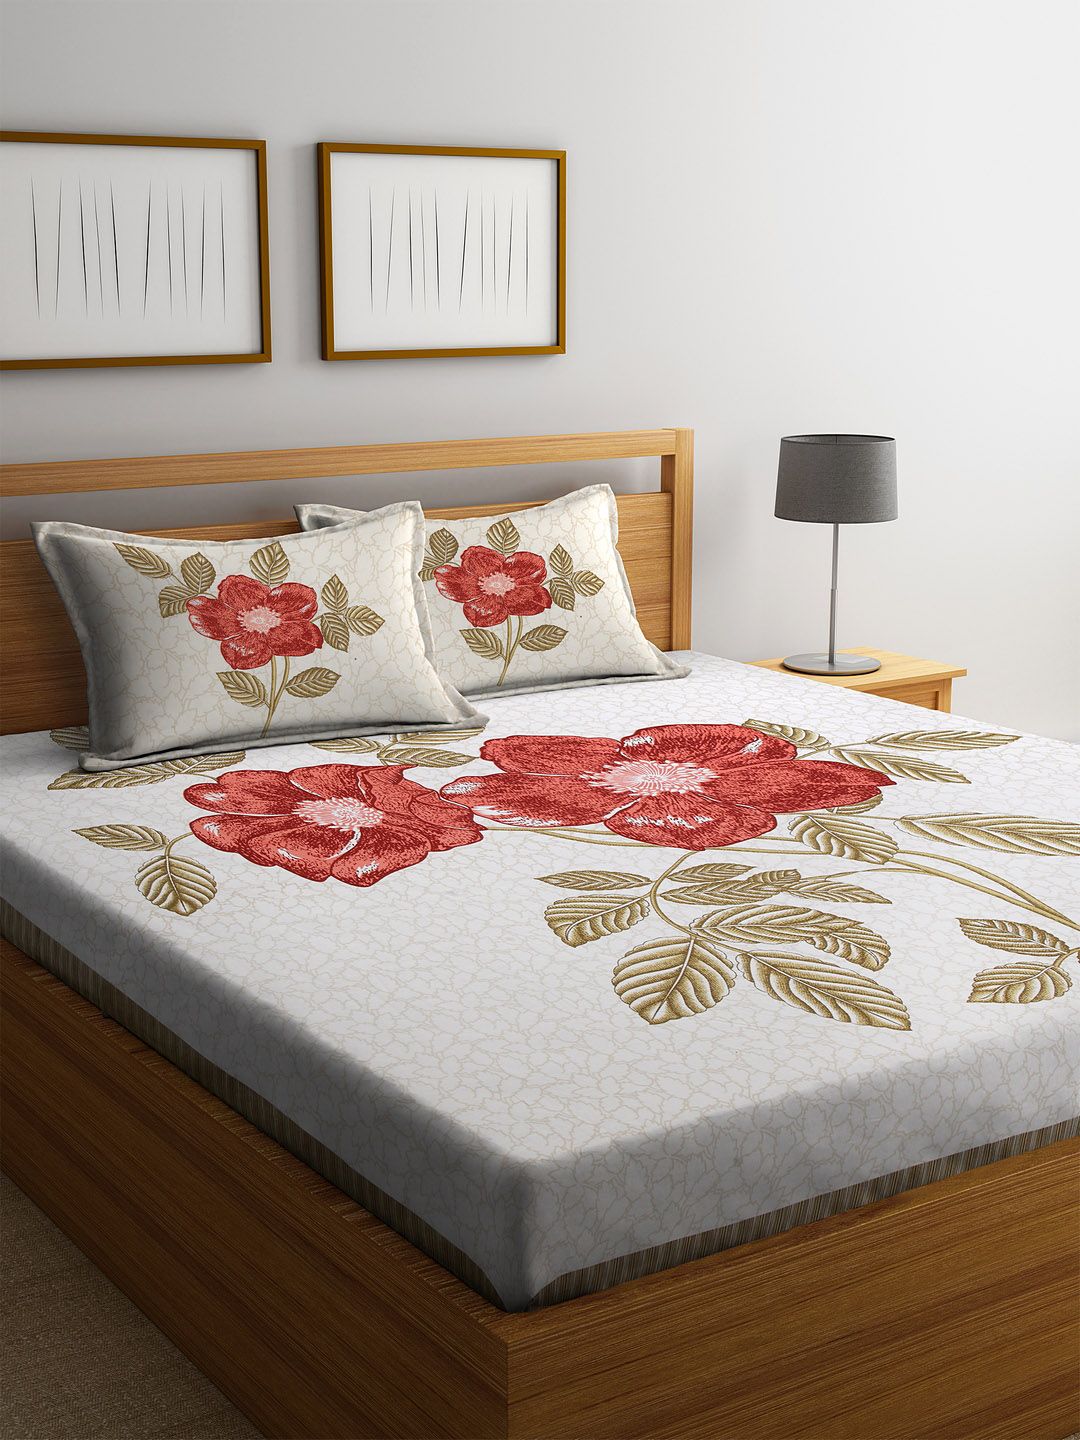 Rajasthan Decor Cream-Coloured & Orange Floral 144 TC Cotton 1 King Bedsheet with 2 Pillow Covers Price in India